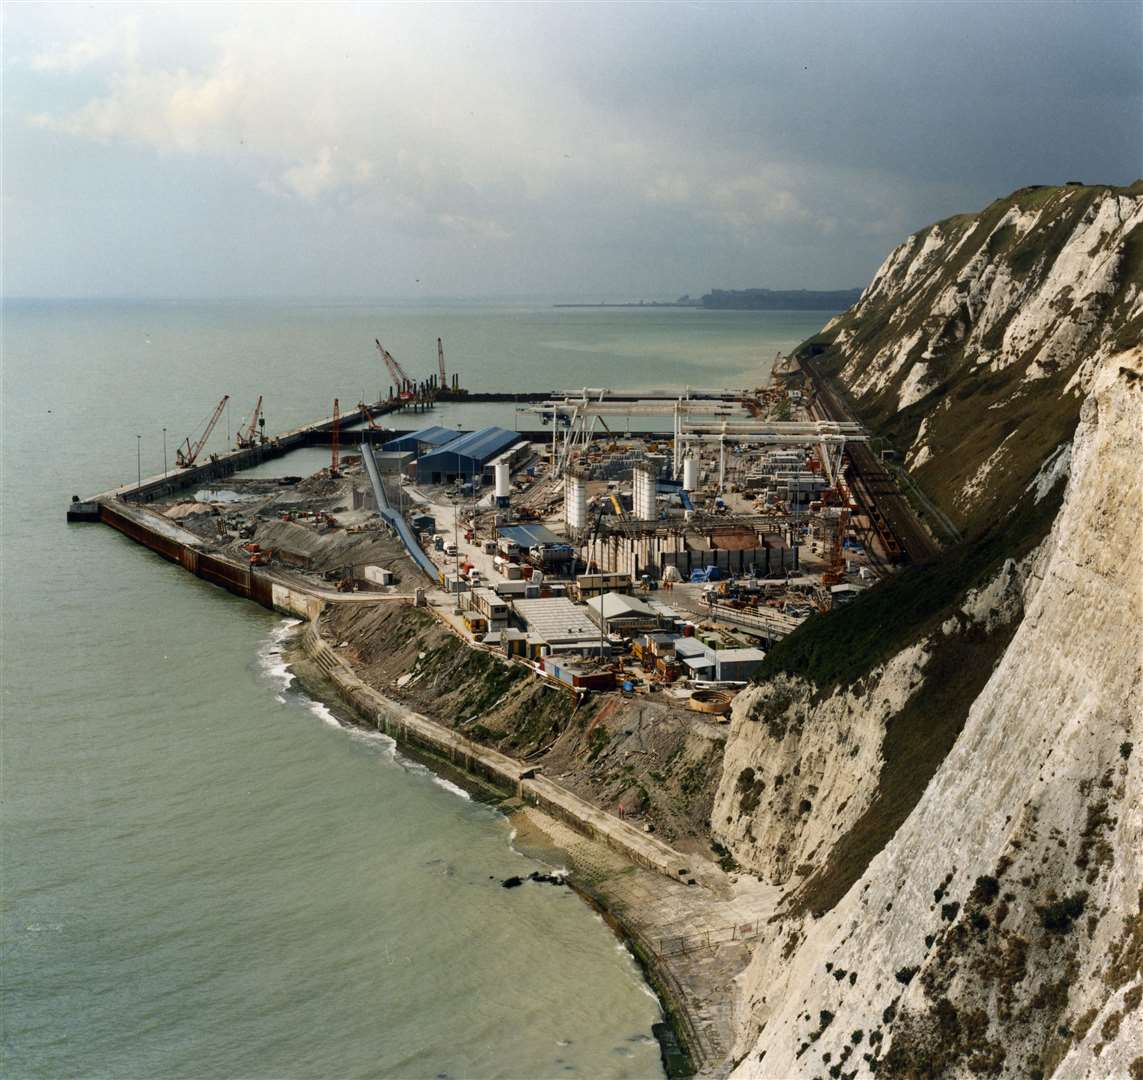 Construction work at Samphire Hoe in the 90s